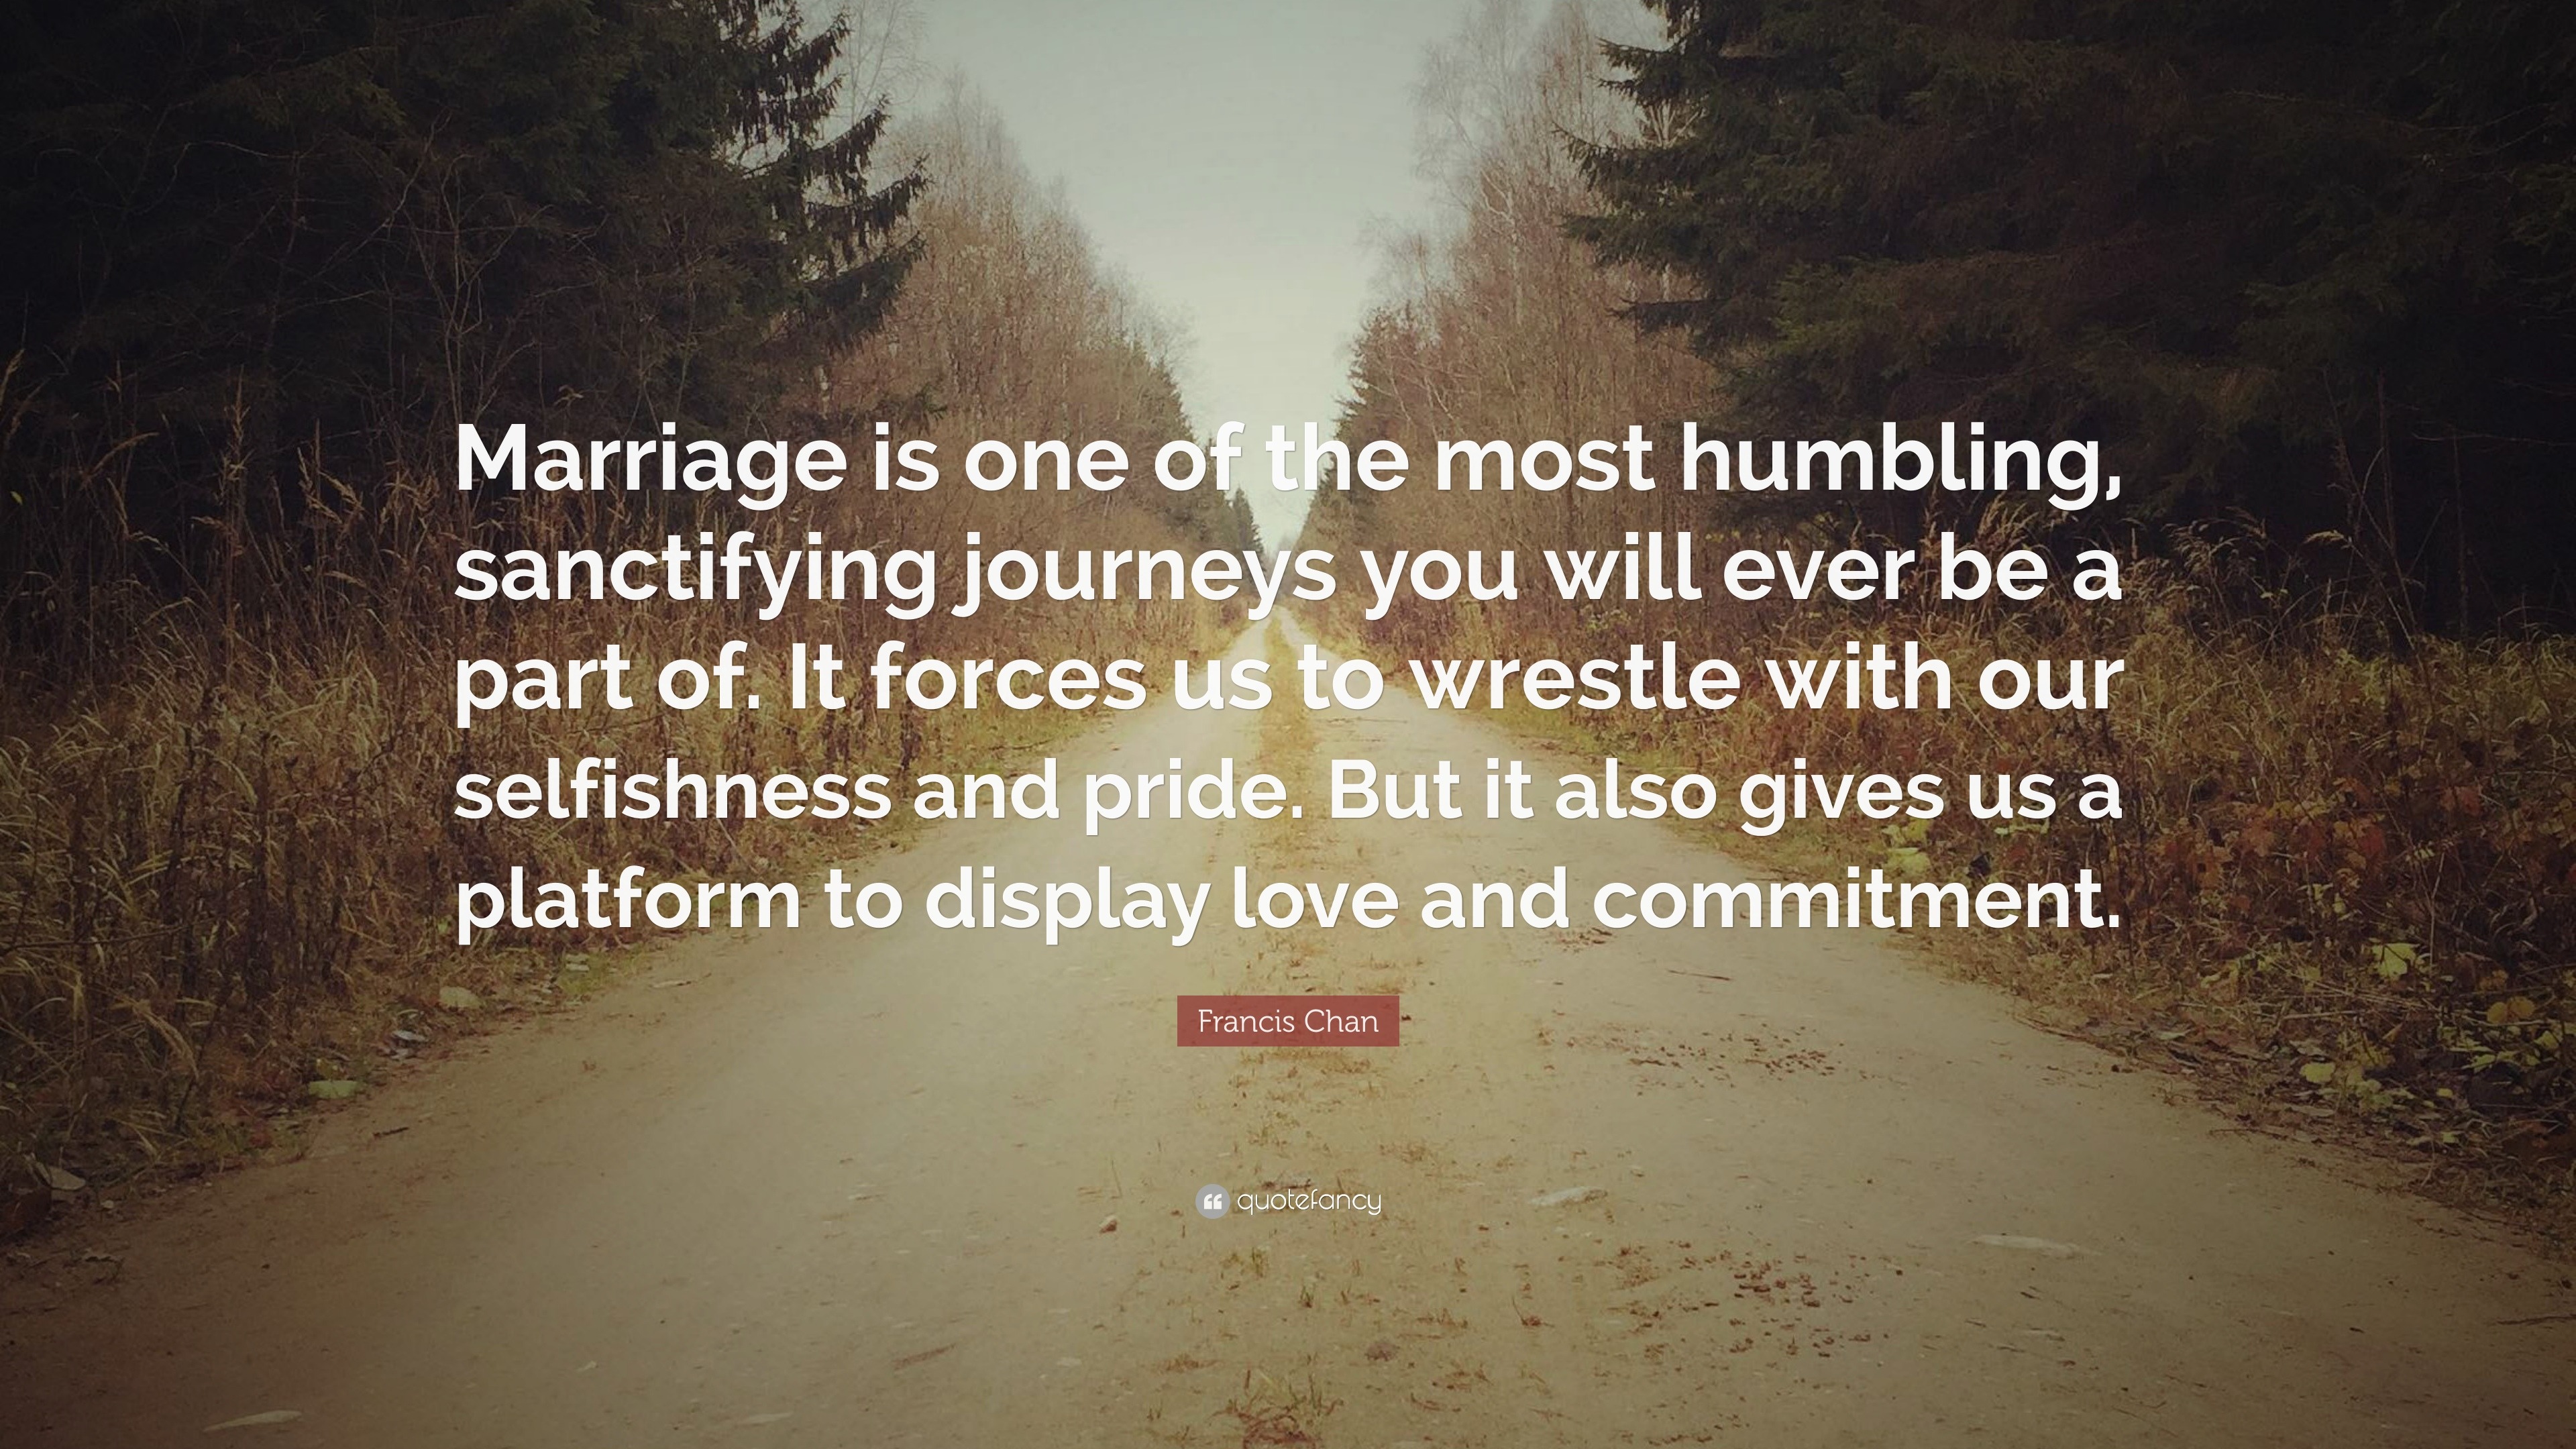 Francis Chan Quote: "Marriage is one of the most humbling ...